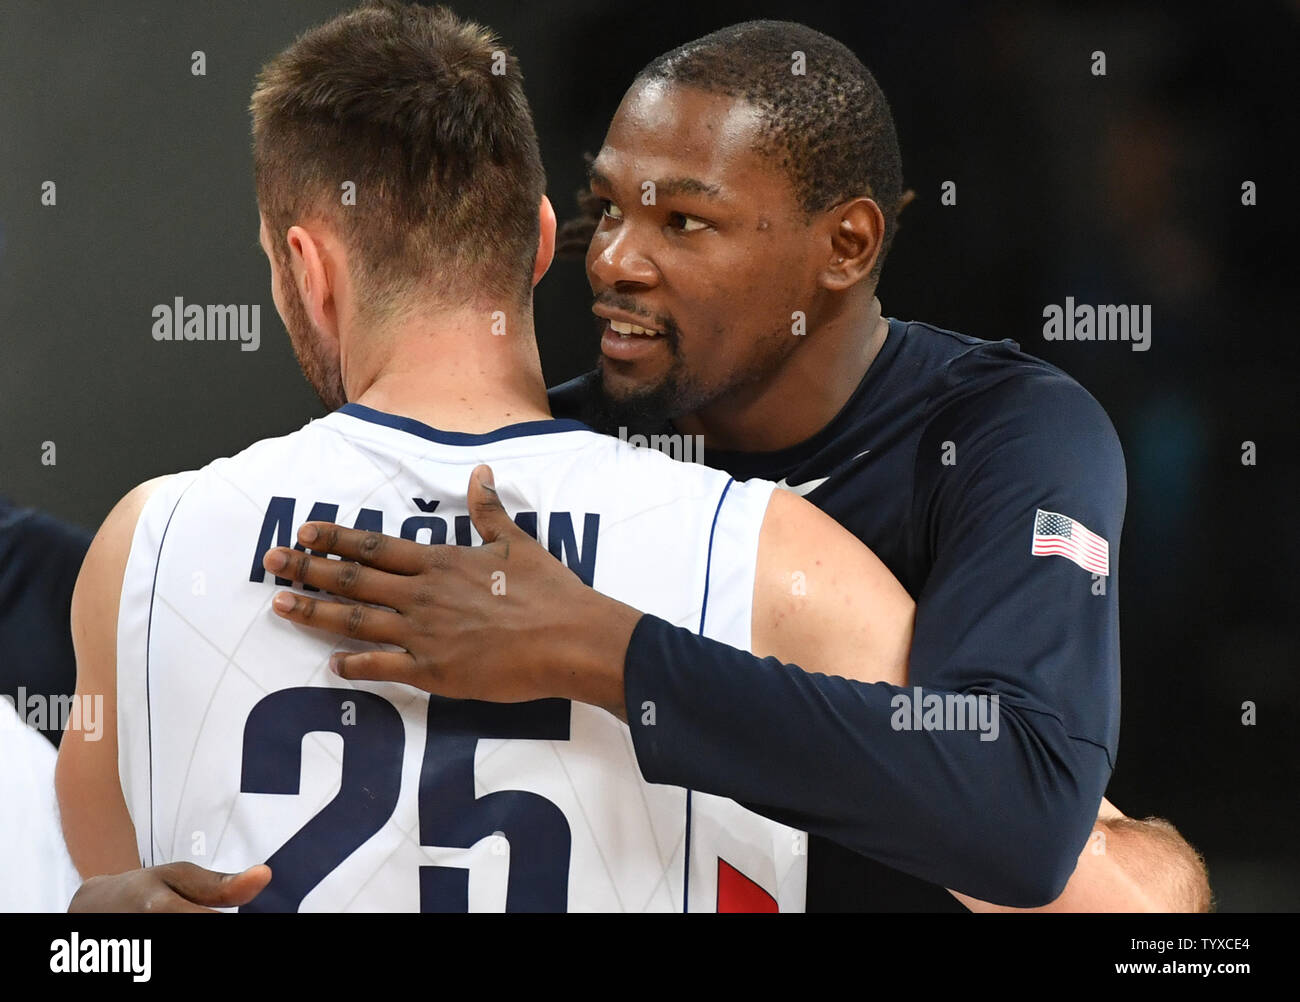 Kevin Durant  of the United States hugs Milan Macvan of Serbia after the Men's Basketball gold medal game between Serbia and the United States at Carioca Arena 1 at the 2016 Rio Summer Olympics in Rio de Janeiro, Brazil, on August 21, 2016. The United States defeated Serbia 96-66 to win its third consecutive gold medal.  Photo by Kevin Dietsch/UPI Stock Photo